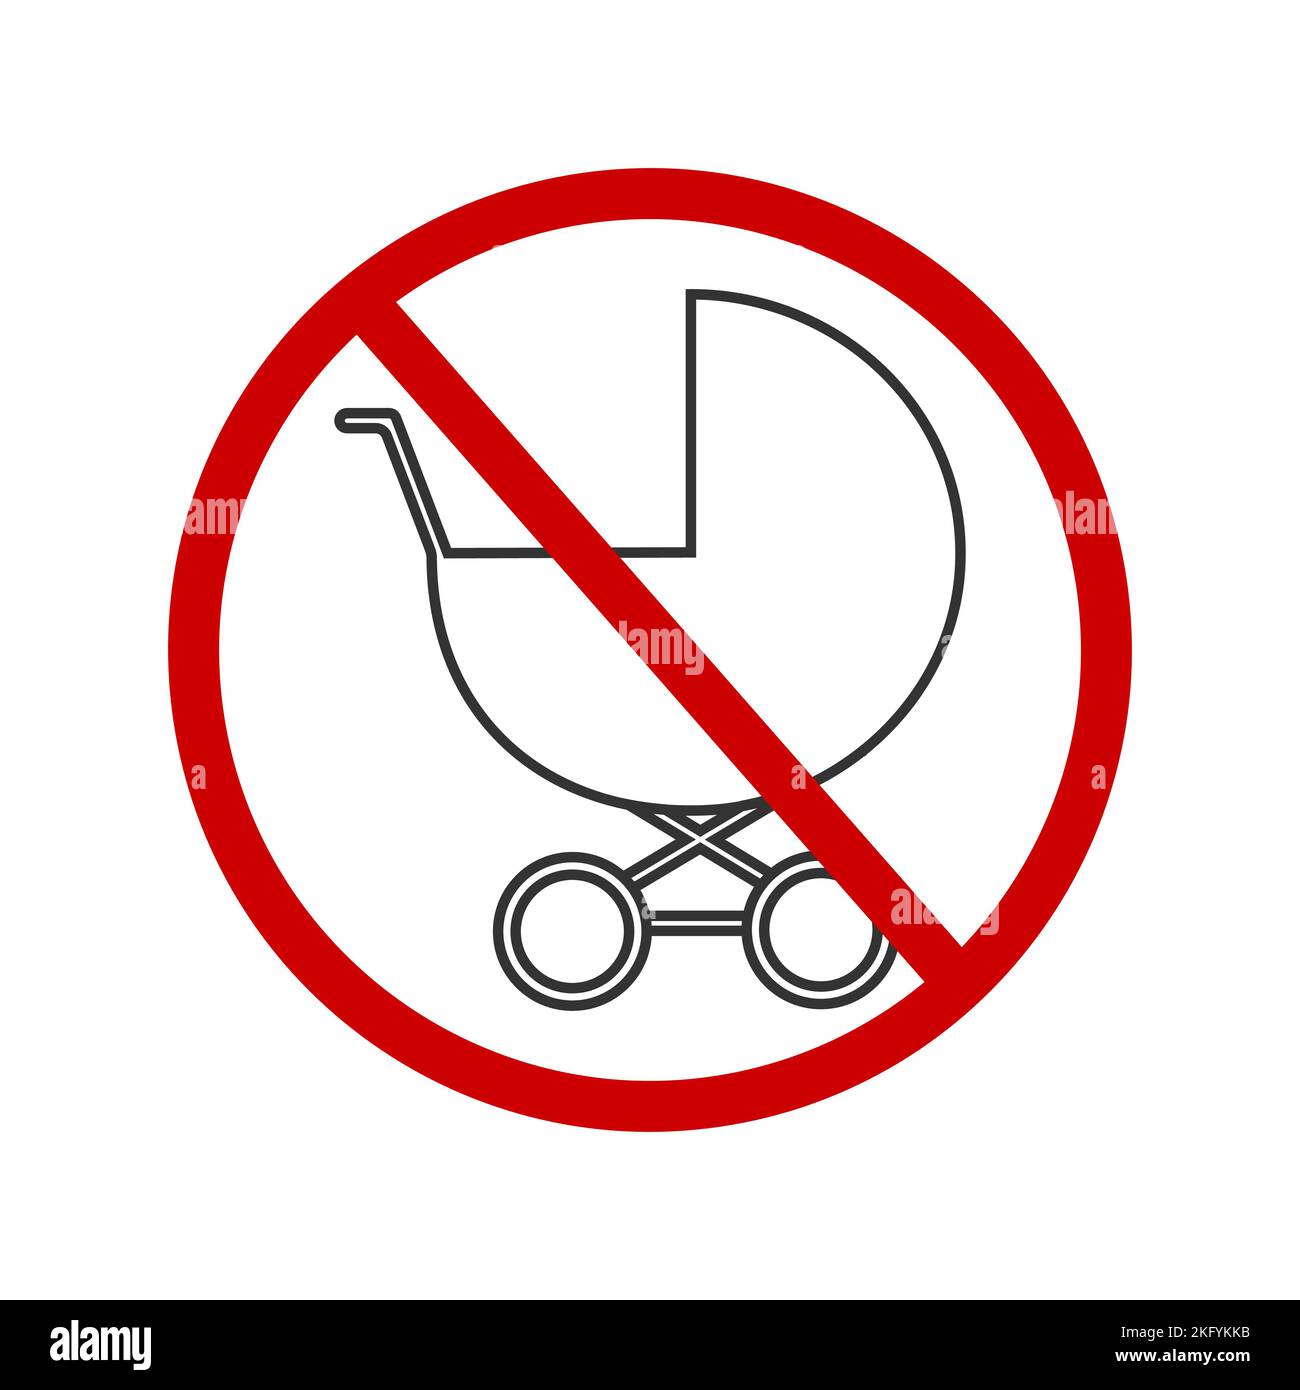 No baby prams icon. Kids prohibited zone sticker for public places. Carriage pictogram crossed by red forbidden sign. Vector graphic illustration. Stock Vector